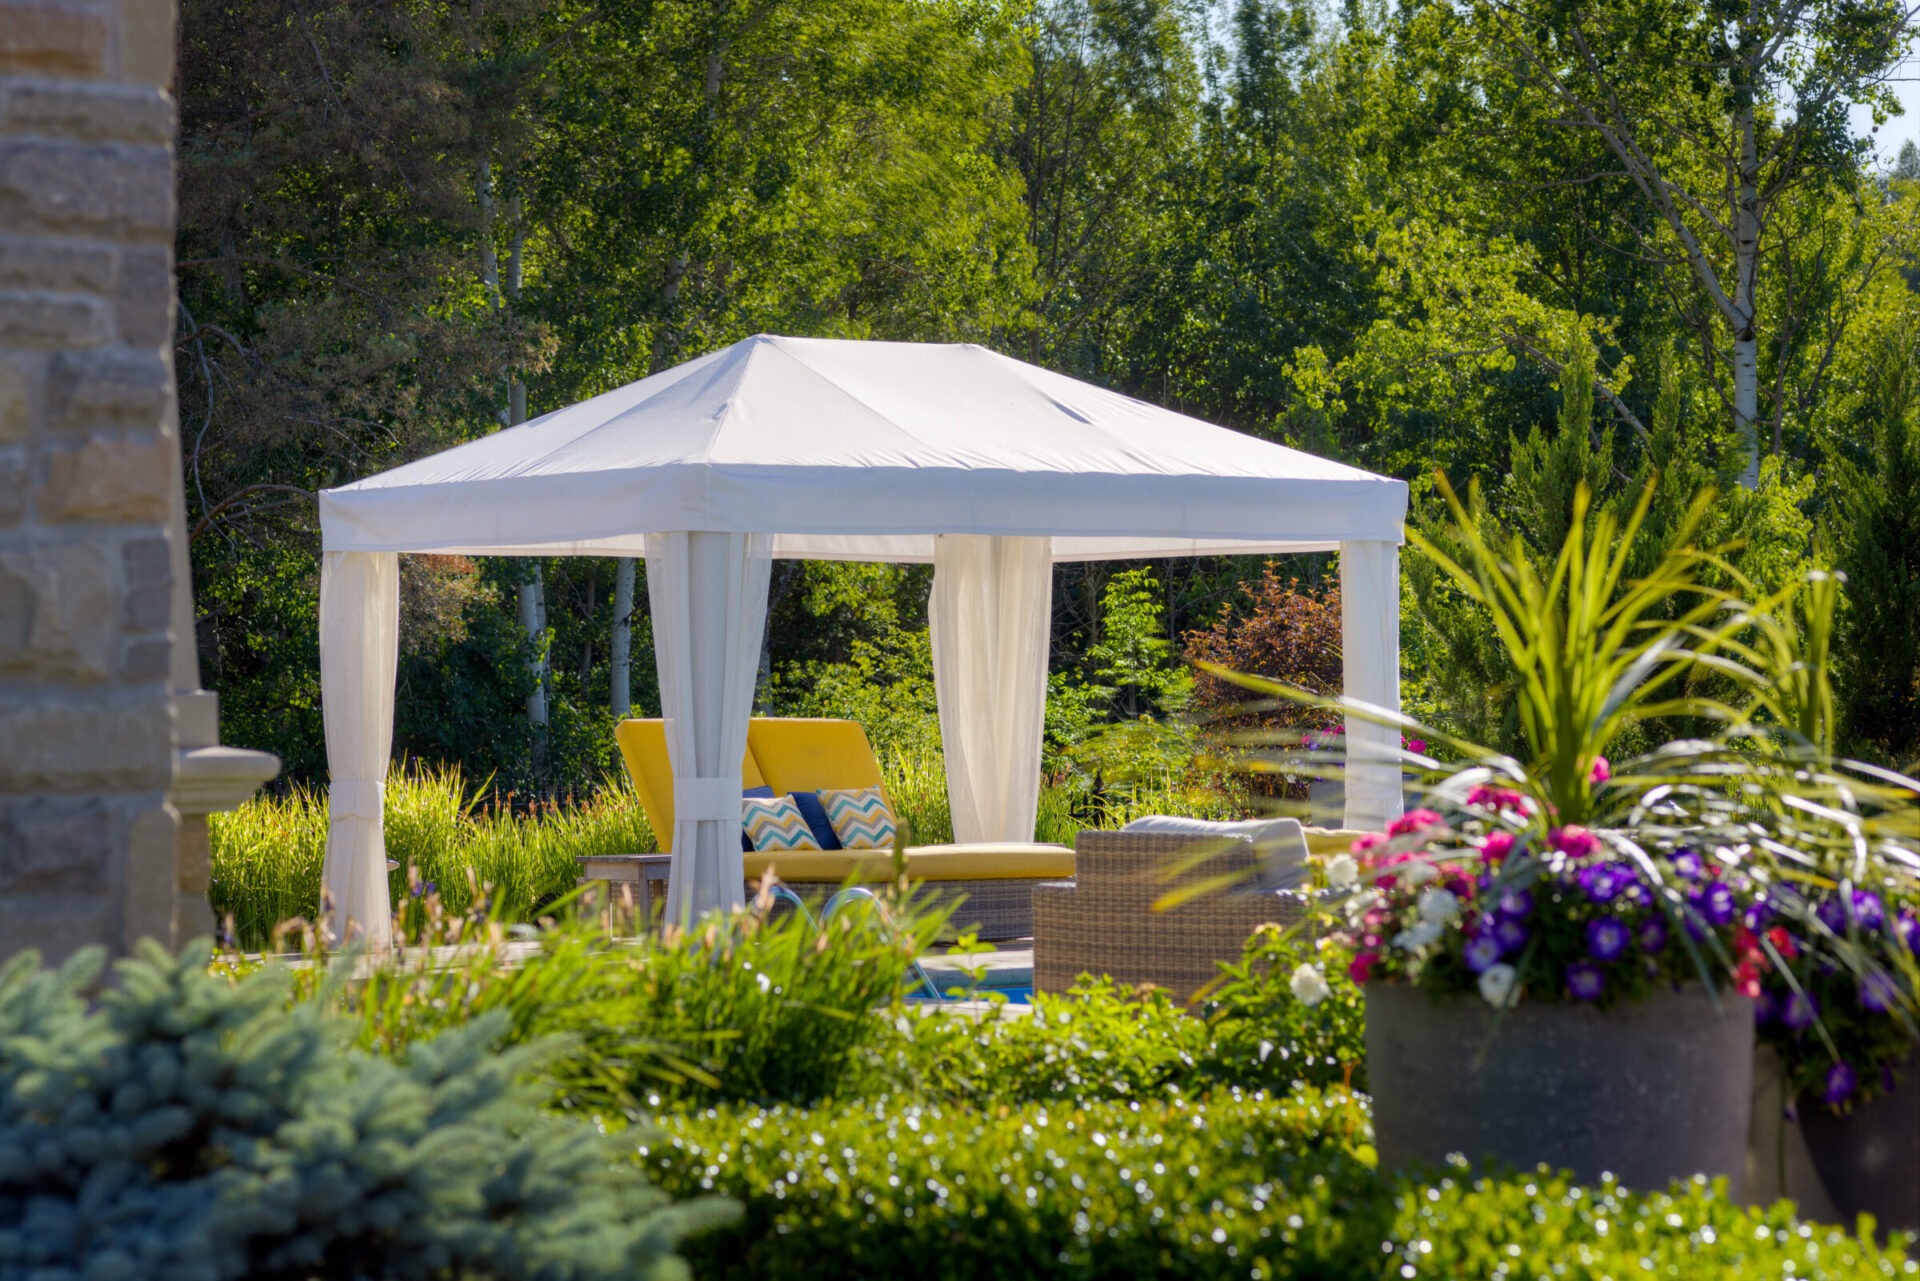 A serene garden setting features a white gazebo with sheer curtains and cozy yellow-cushioned patio furniture surrounded by lush greenery and vibrant flowers.